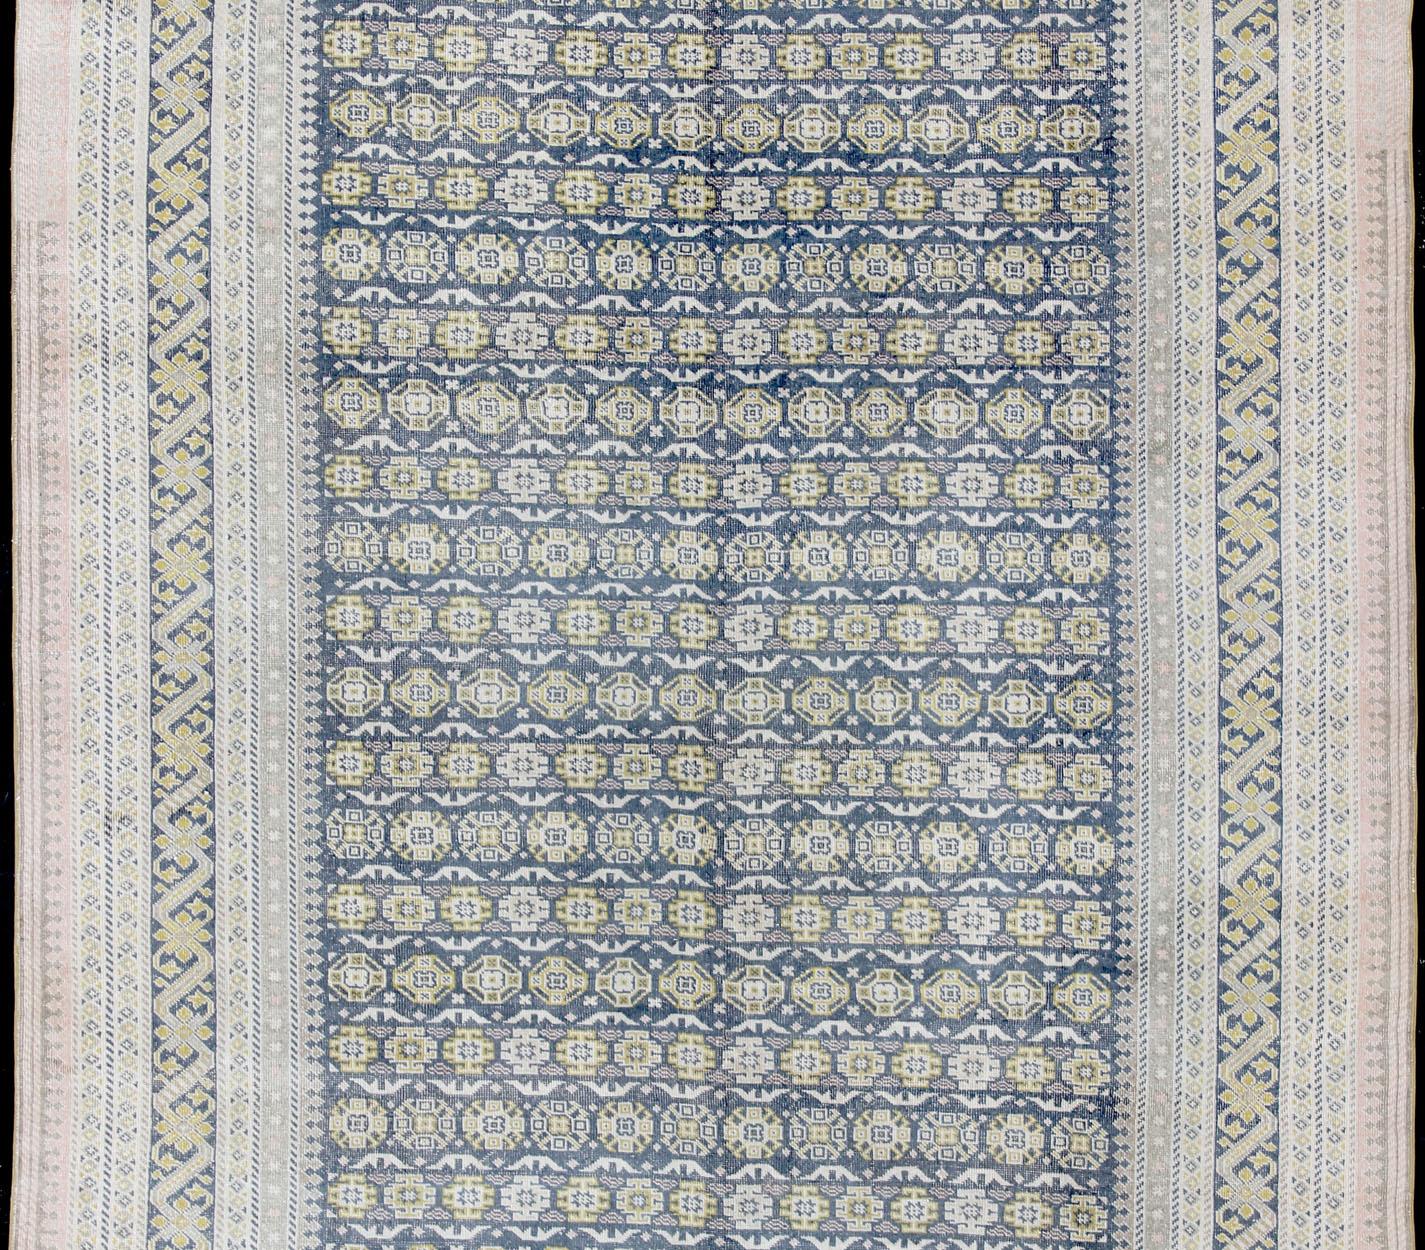 Antique Khotan rug in shades of blue, Taupe, gray, pink, and yellow, rug SUS-2009-75, country of origin / type: Turkestan / Khotan, 1930

This attractive Khotan rug is a spectacular testament to the complexity of Turkestan design. The dark